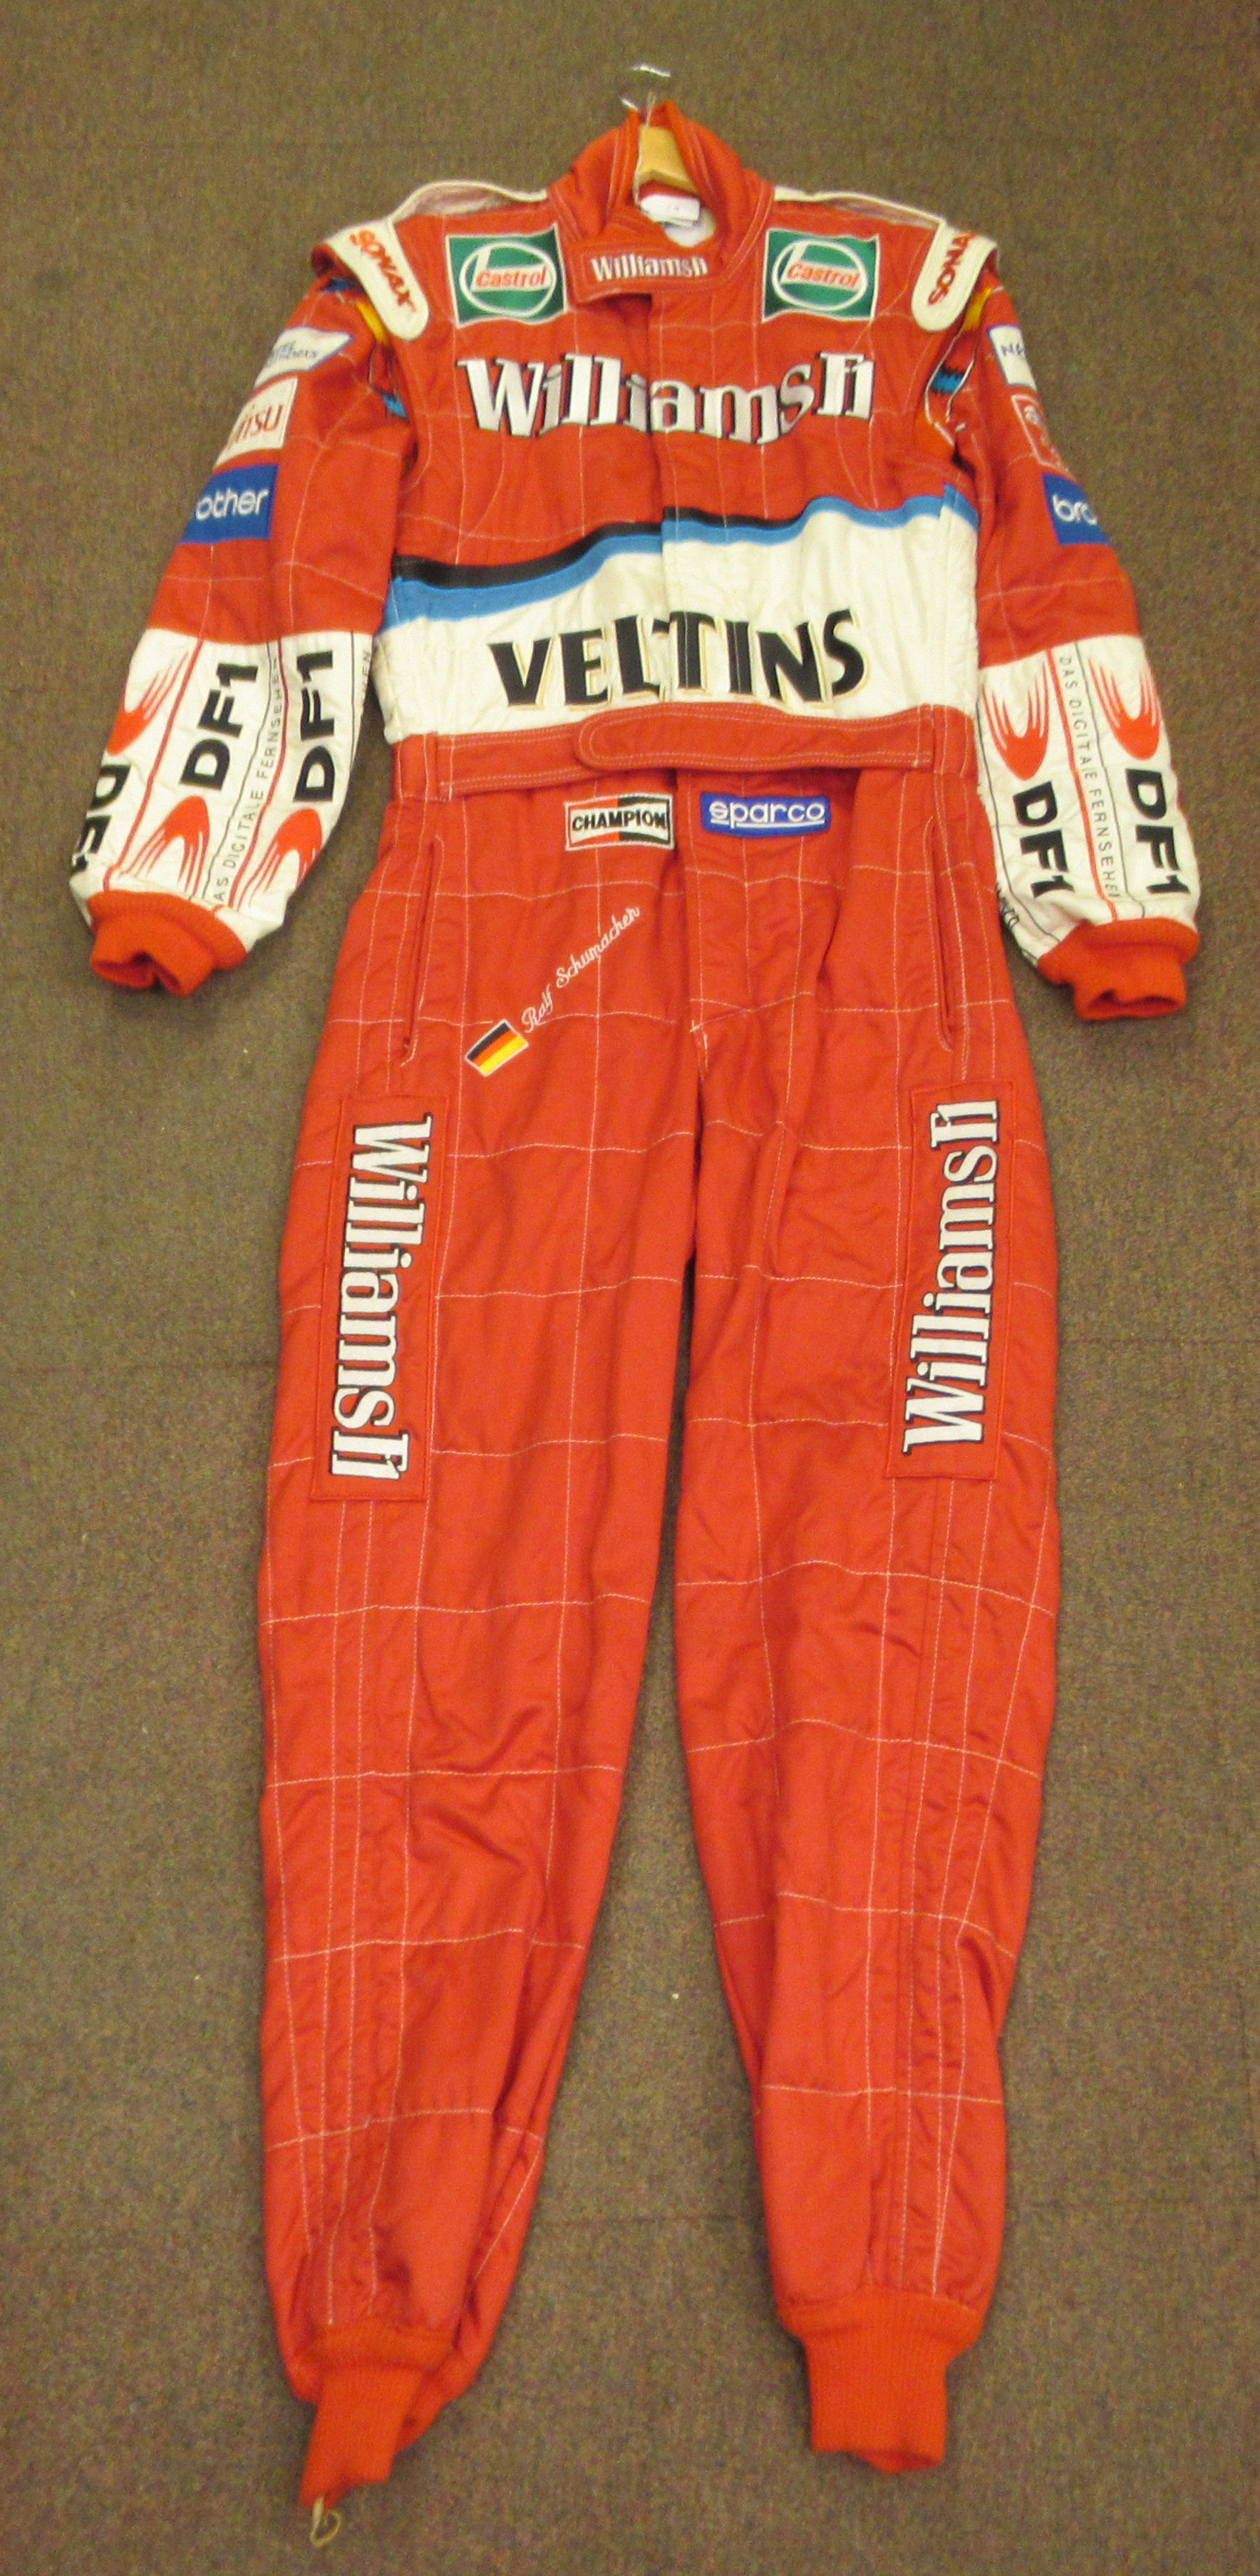 A Sparco Italian made red fabric racesuit, believed to have been owned by Ralf Schumacher, bearing